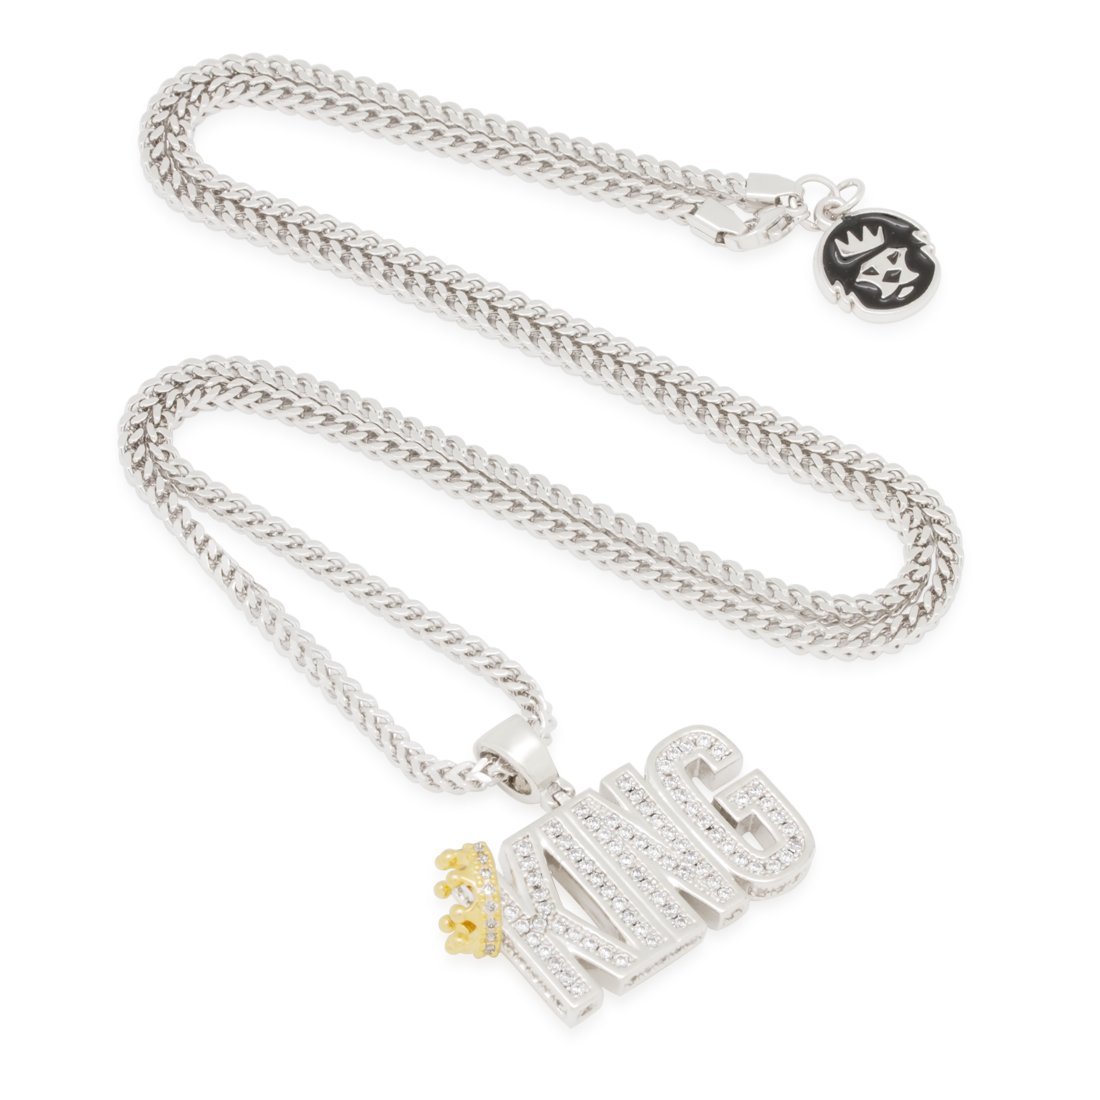 Crowned King Necklace | Hip Hop Jewelry | King Ice